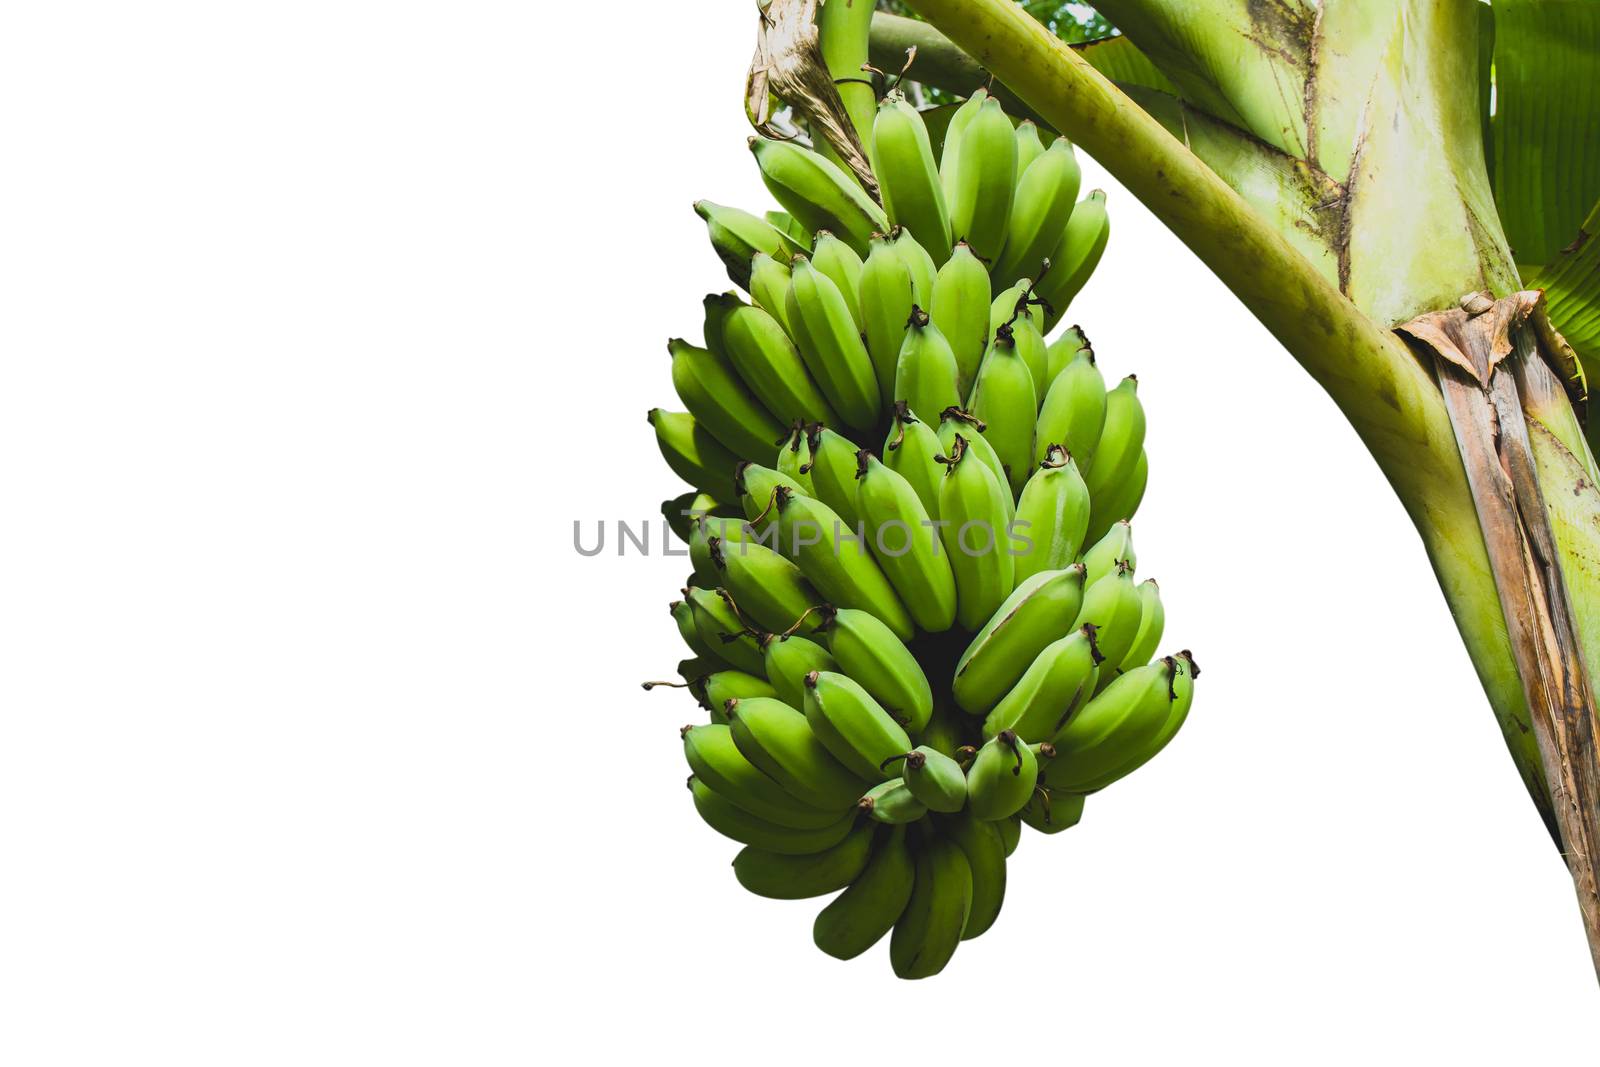 Bananas with banana tree isolated over white background with cli by kirisa99